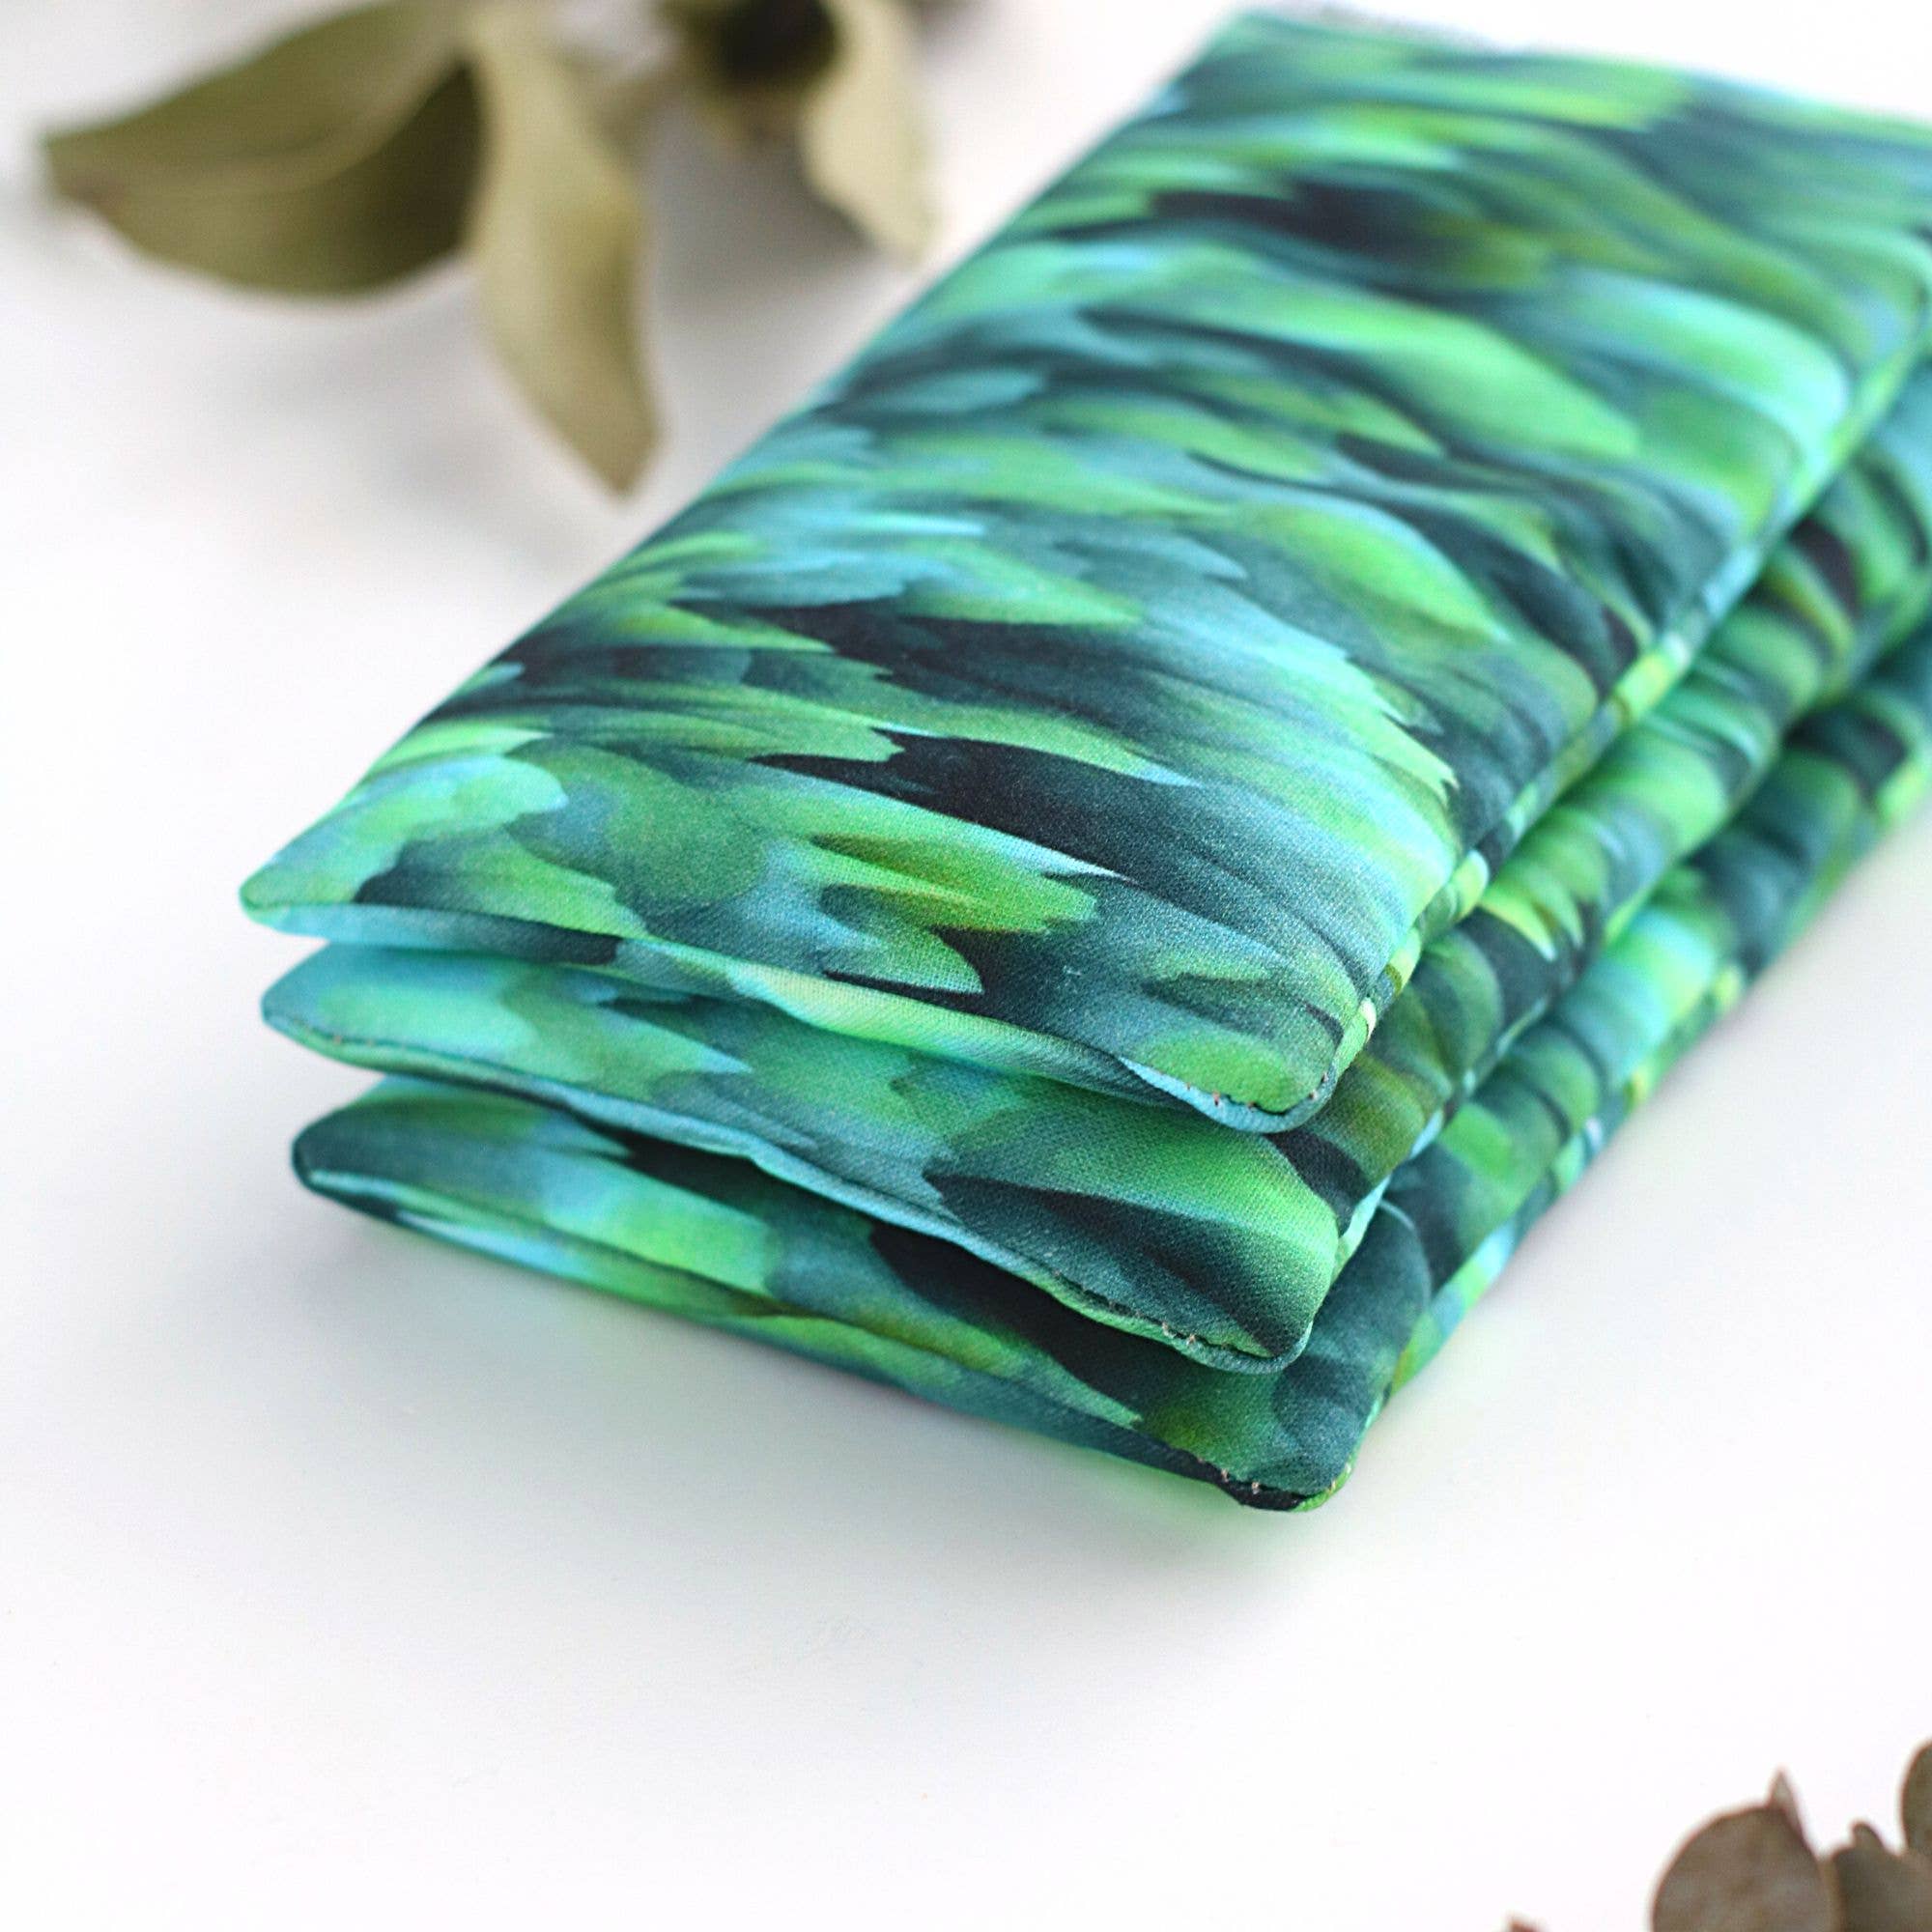 Three Breathe Gift Sets: Winter Eucalyptus Eye Pillows & Handmade Breathe Balms with green and blue tie-dye patterns, displayed on a white background surrounded by eucalyptus leaves from SaidoniaEco.